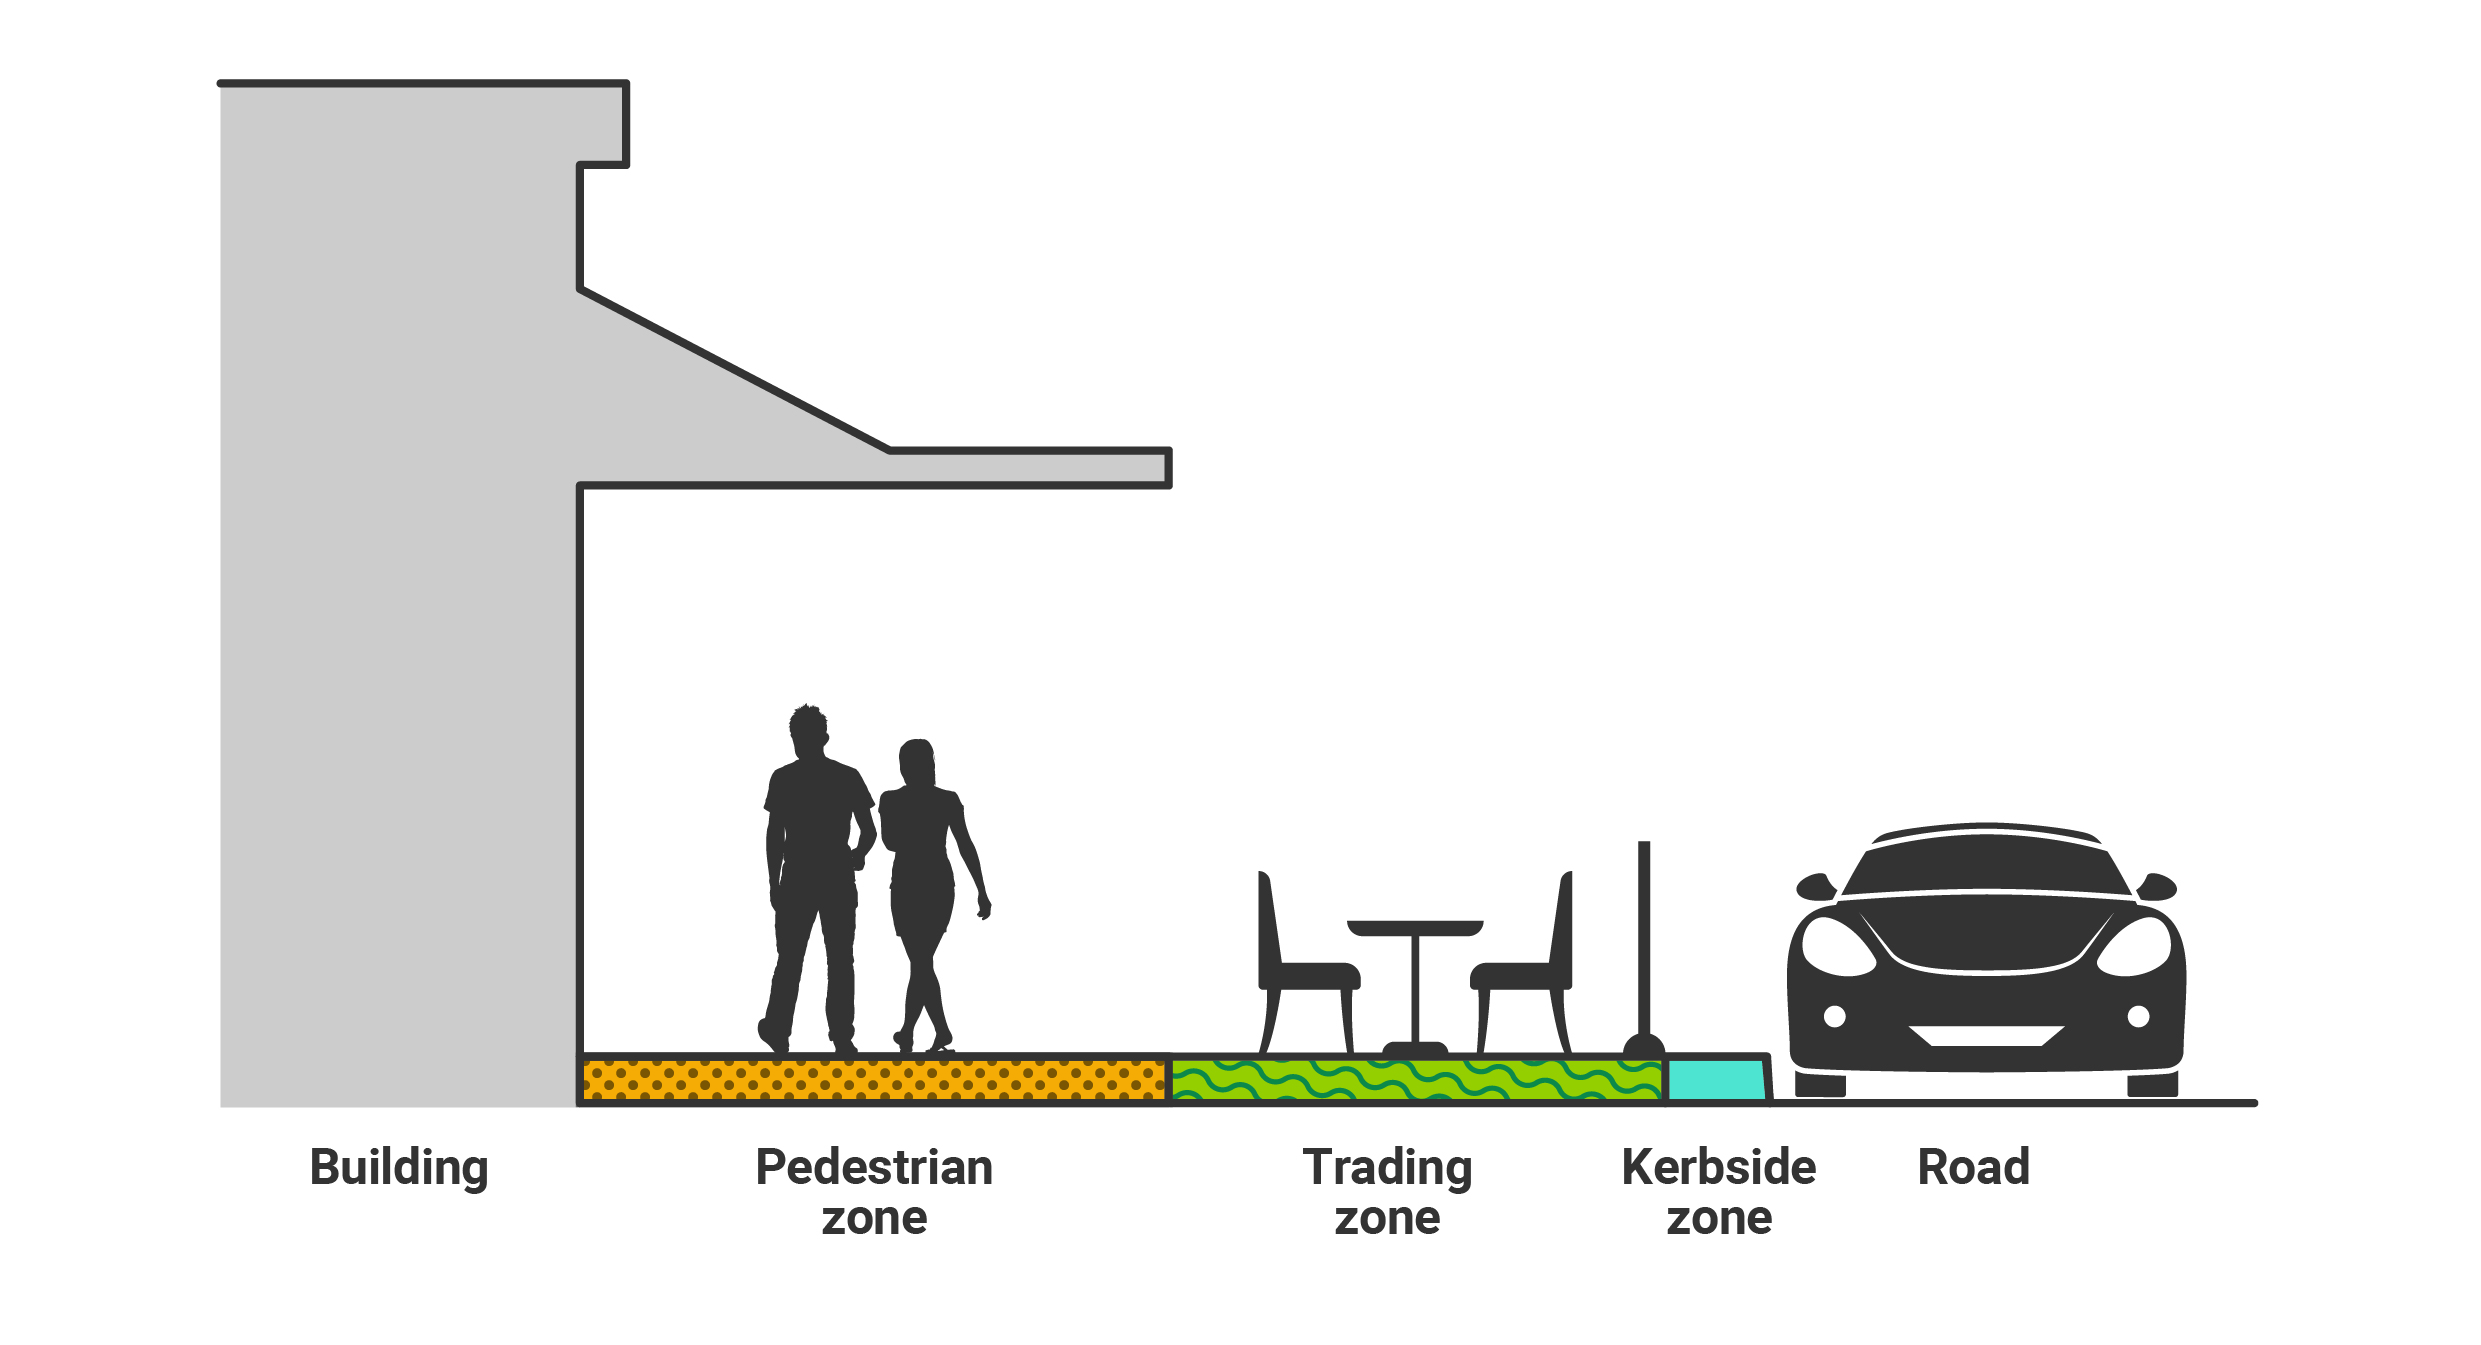  A depiction of the pedestrian zone, trading zone and kerbside zone in between the building and the road. 